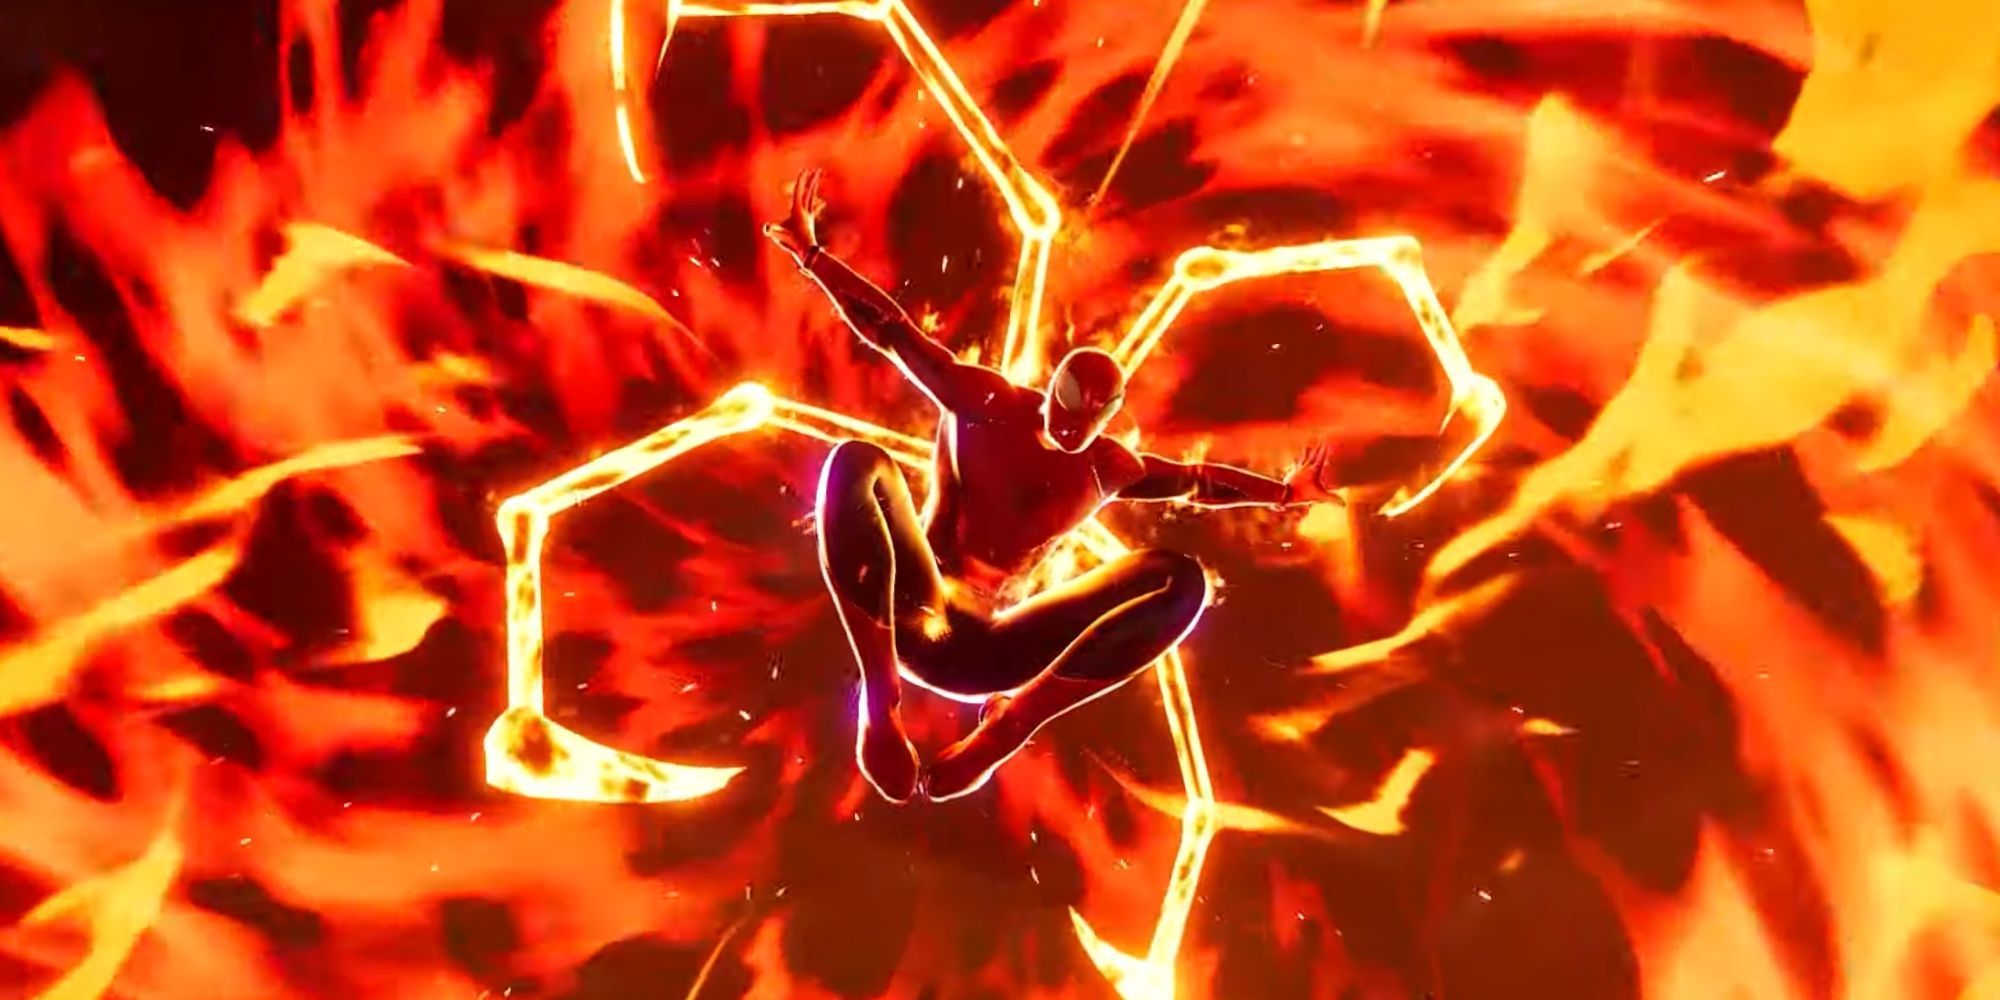 Peter Parker using his "Infernal Spider" ability. Peter has orange energised versions of the Iron Spider legs, with fire surrounding him.